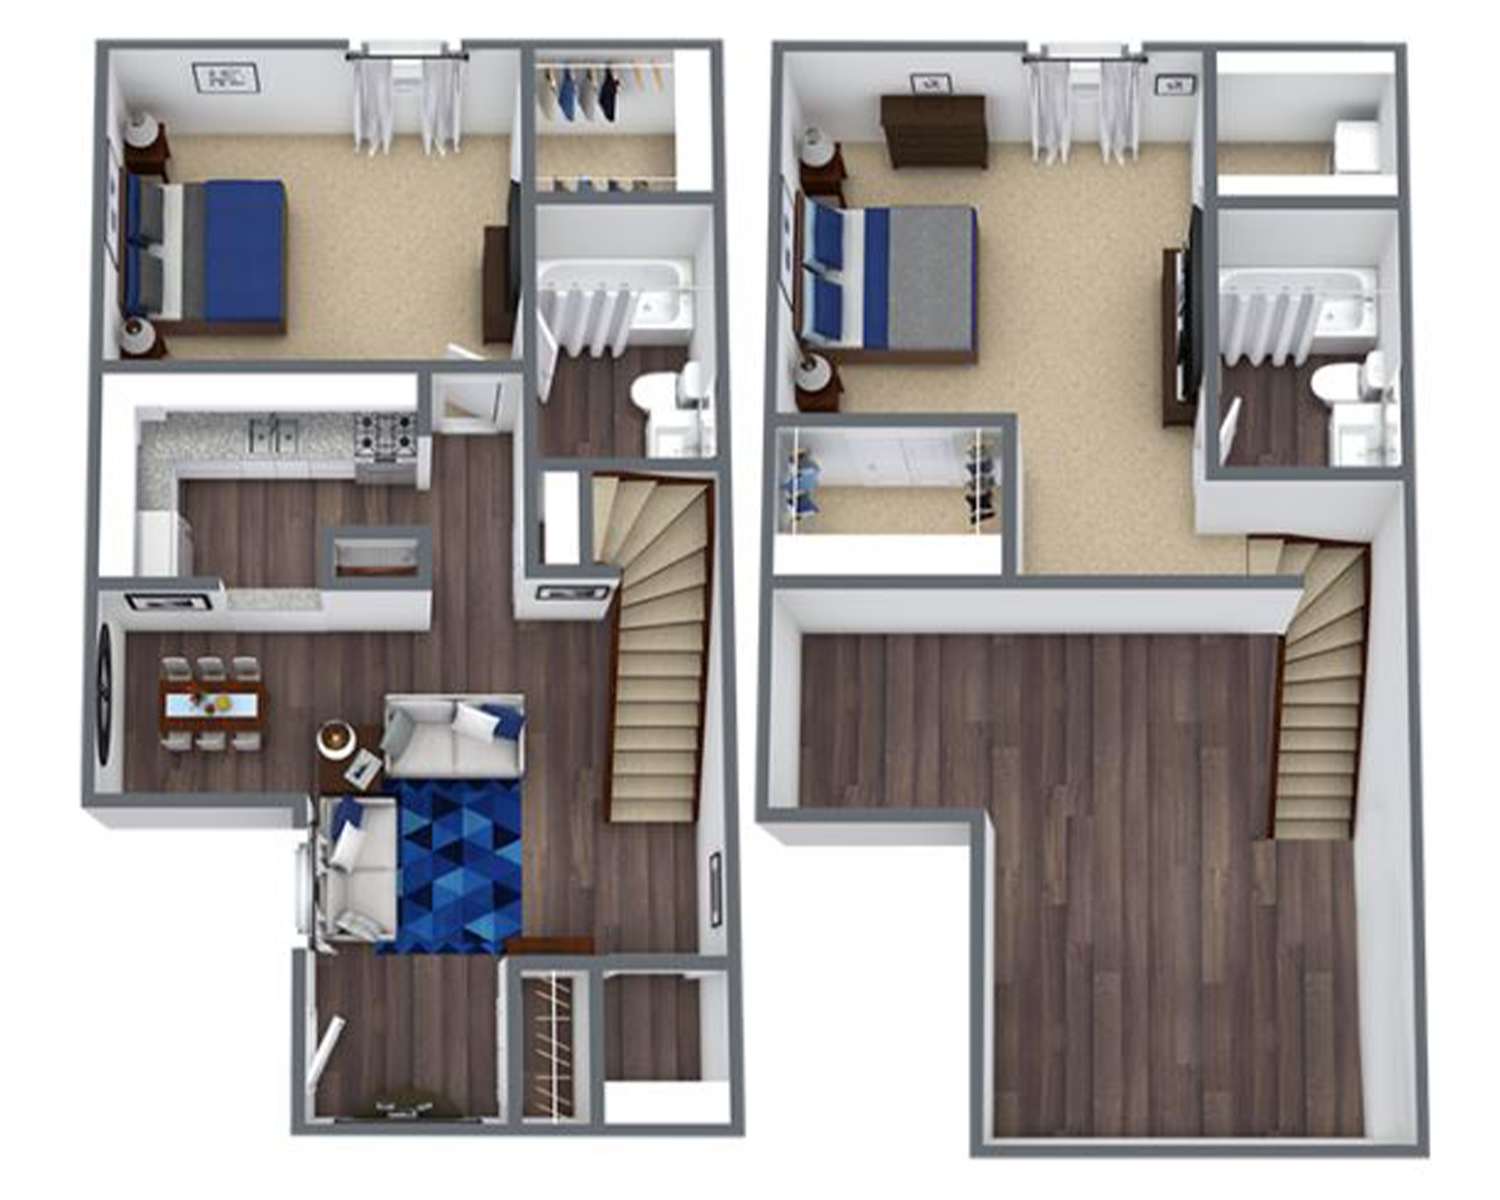 two bed two bath apartment floor plan at 1,084 square feet